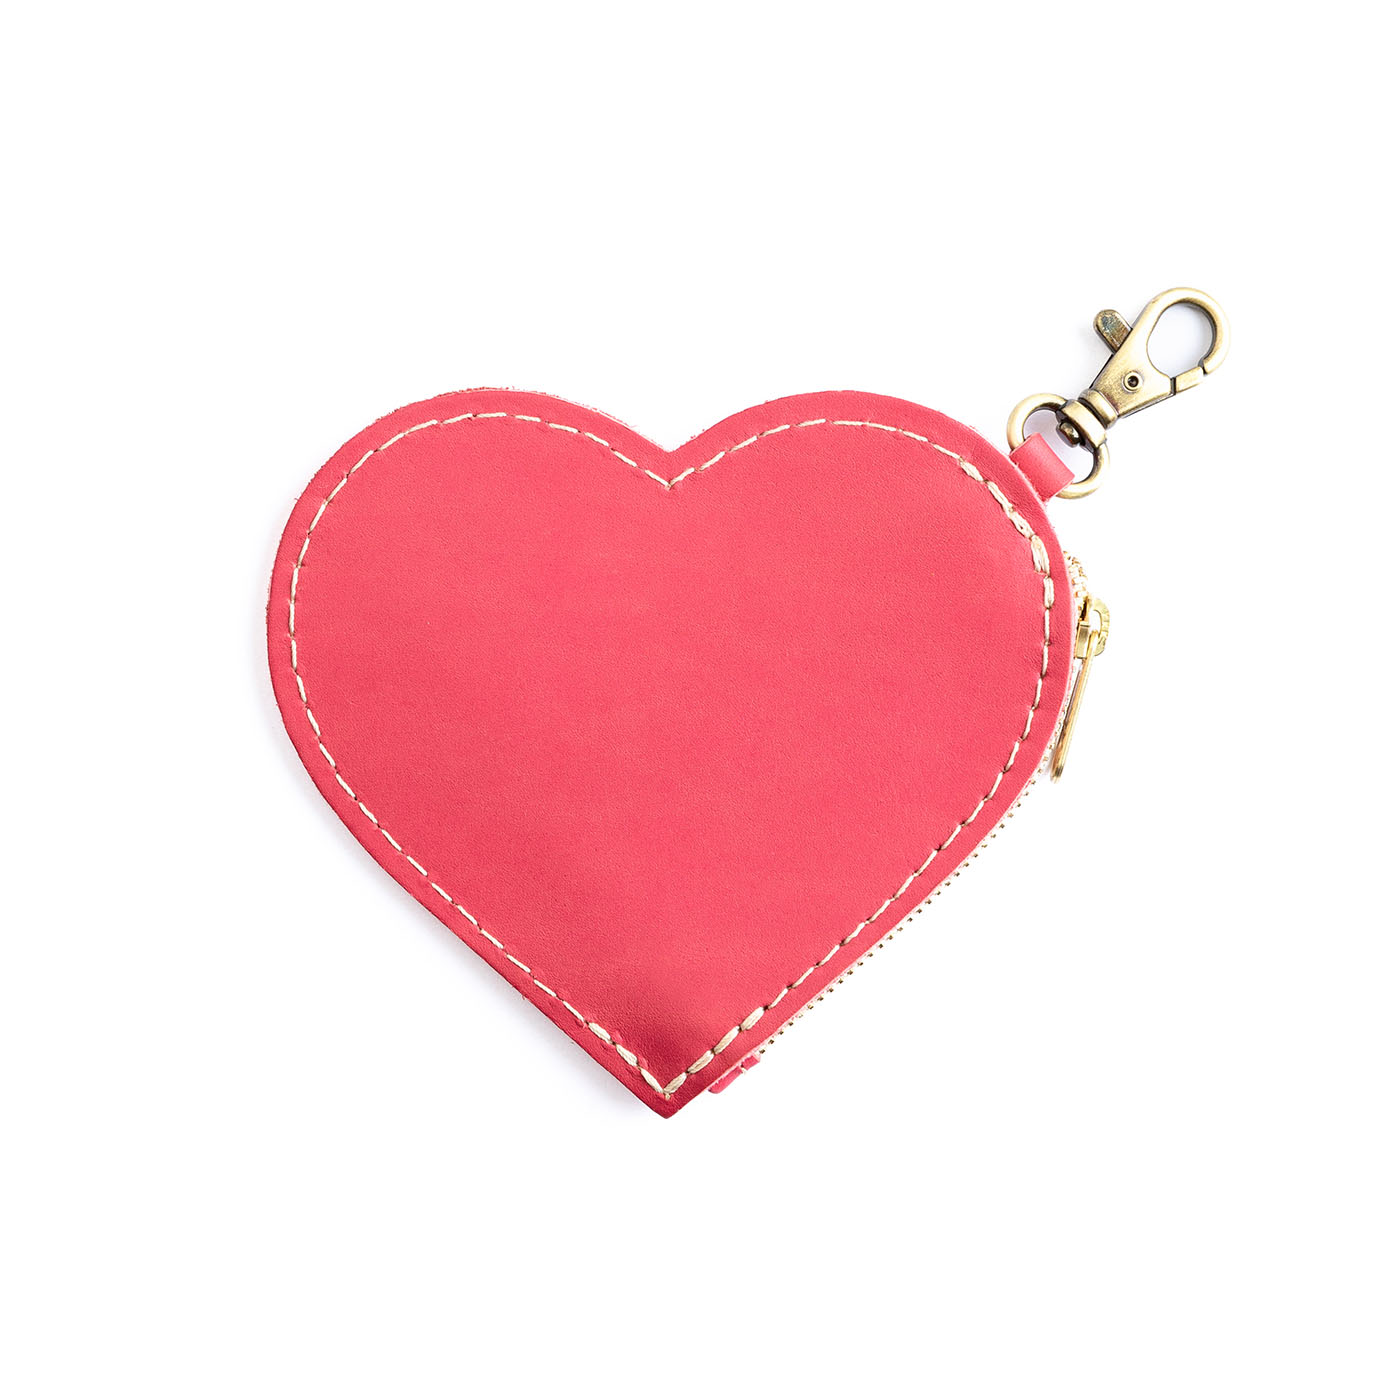 All Color: Tulip | top zippered heart shaped pouch with keychain